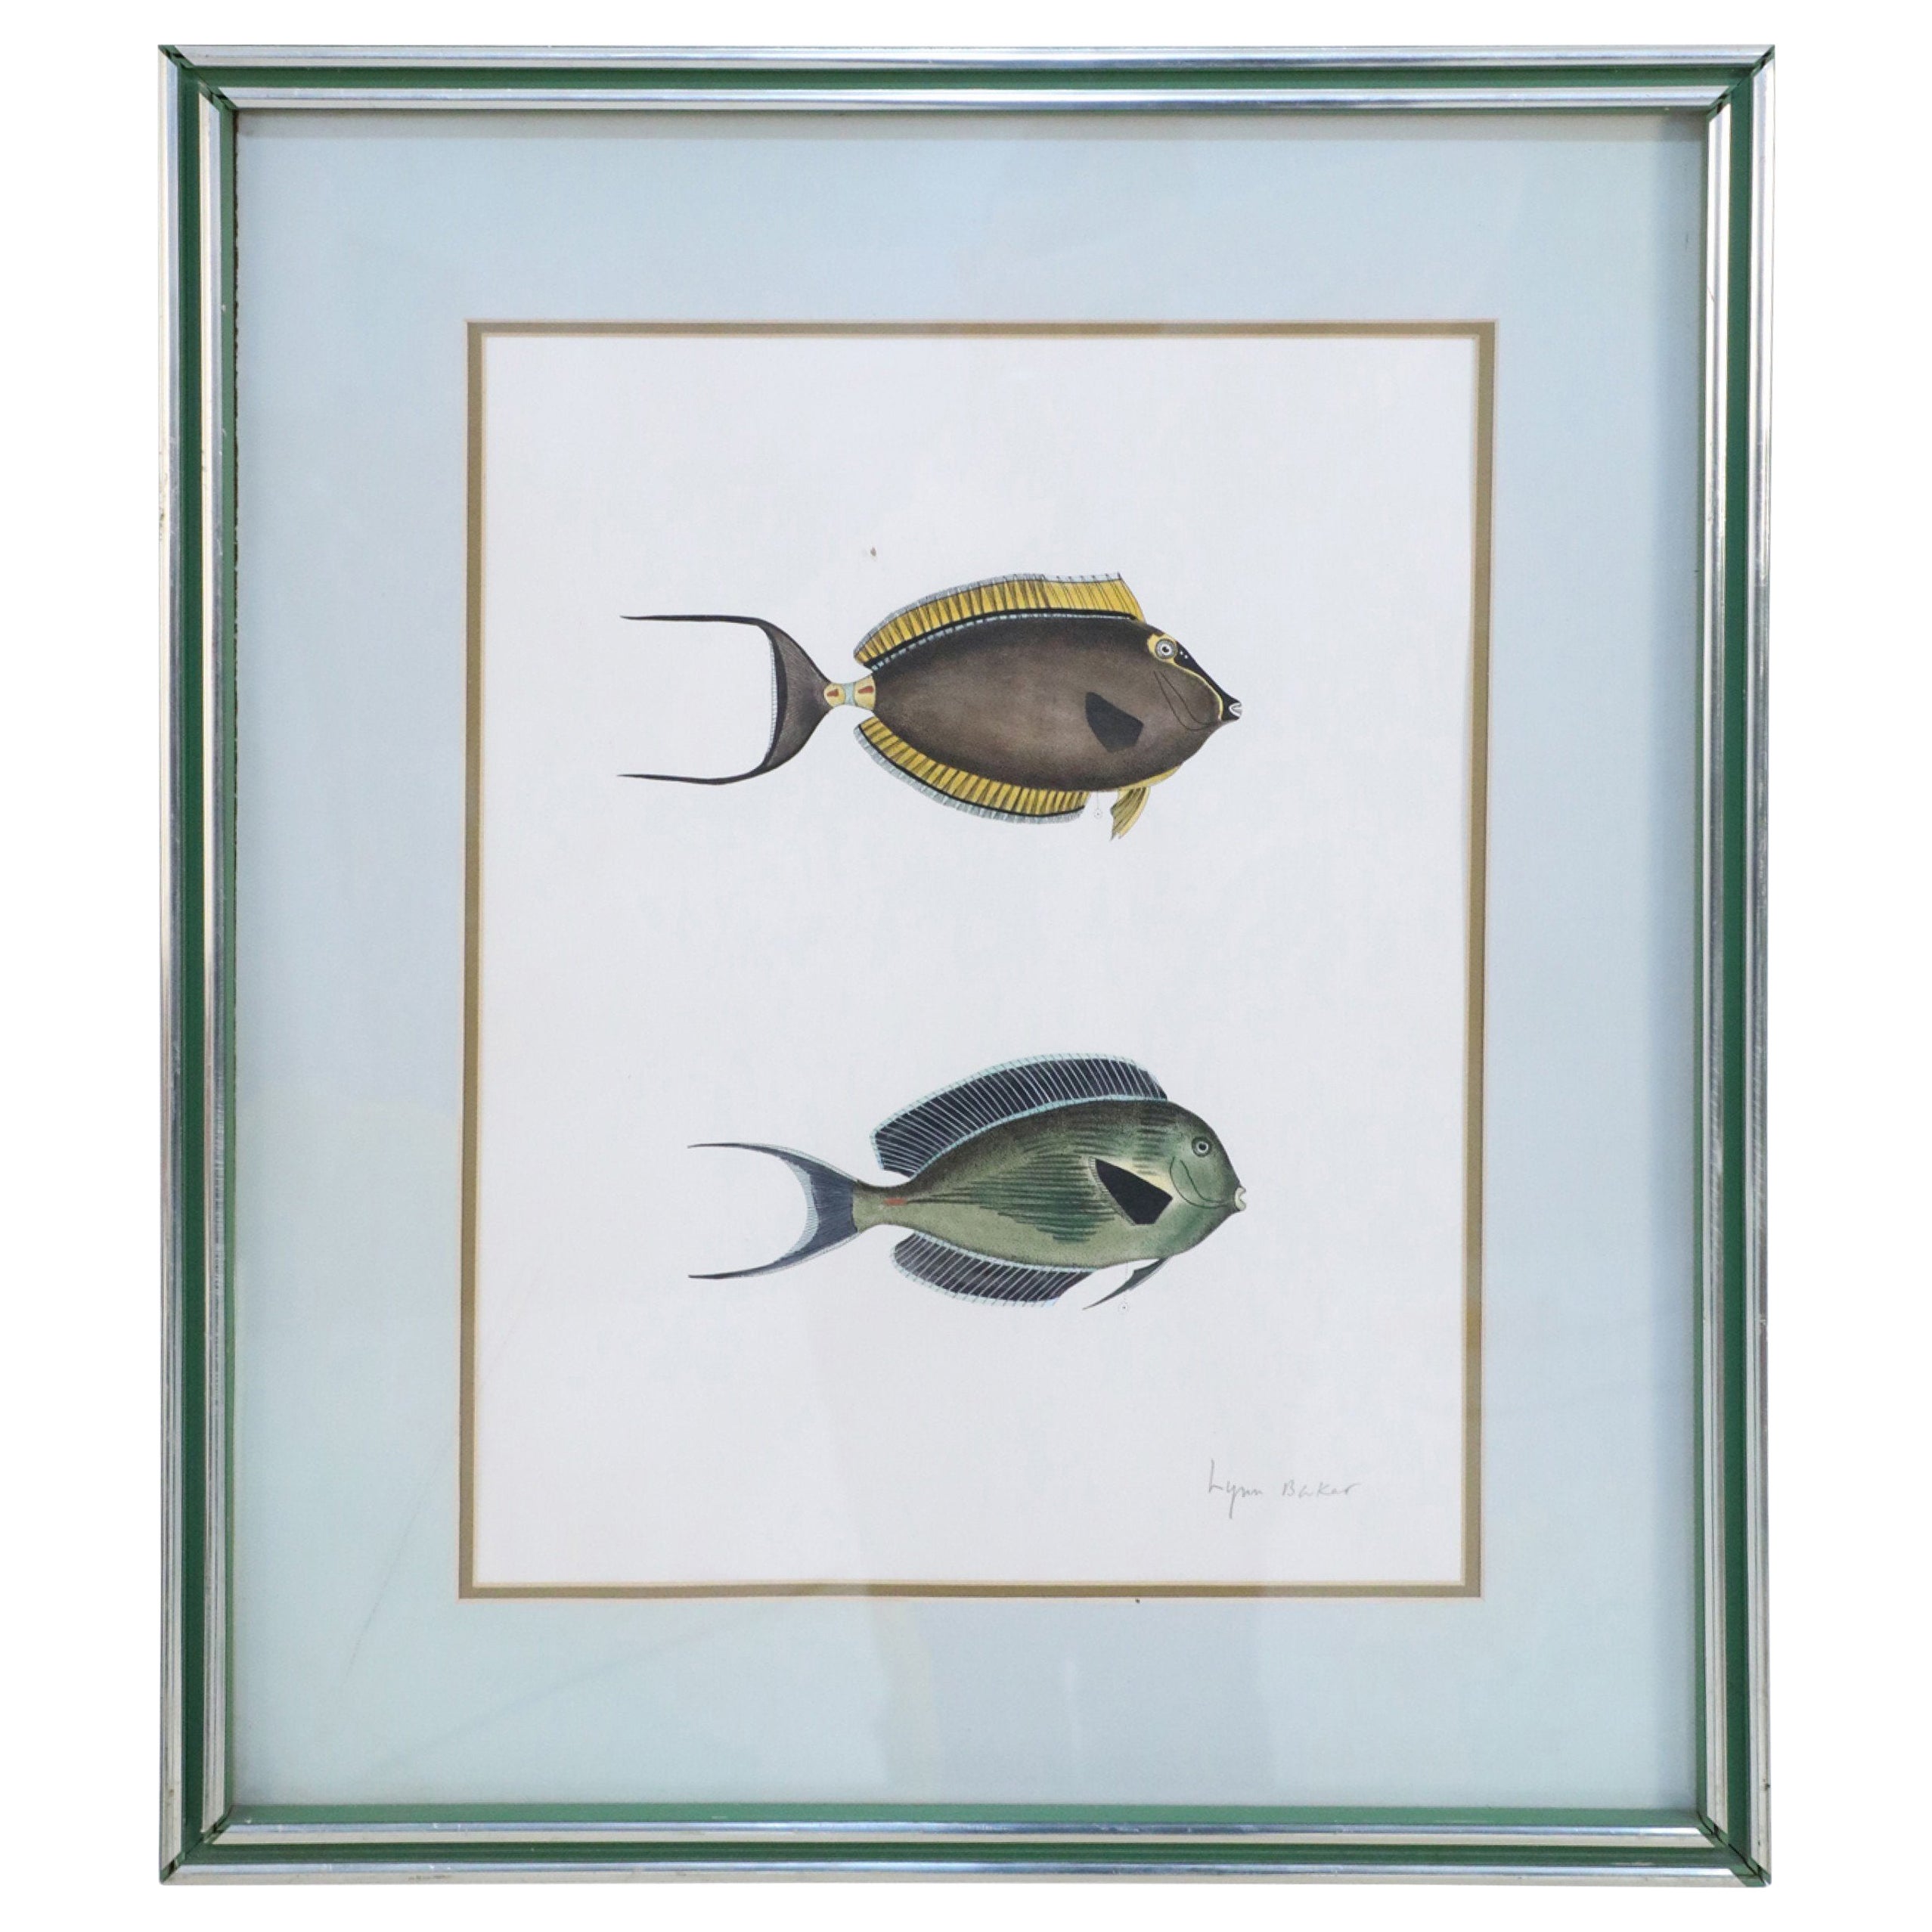 Framed Lithograph of Two Brown and Gray Tropical Fish